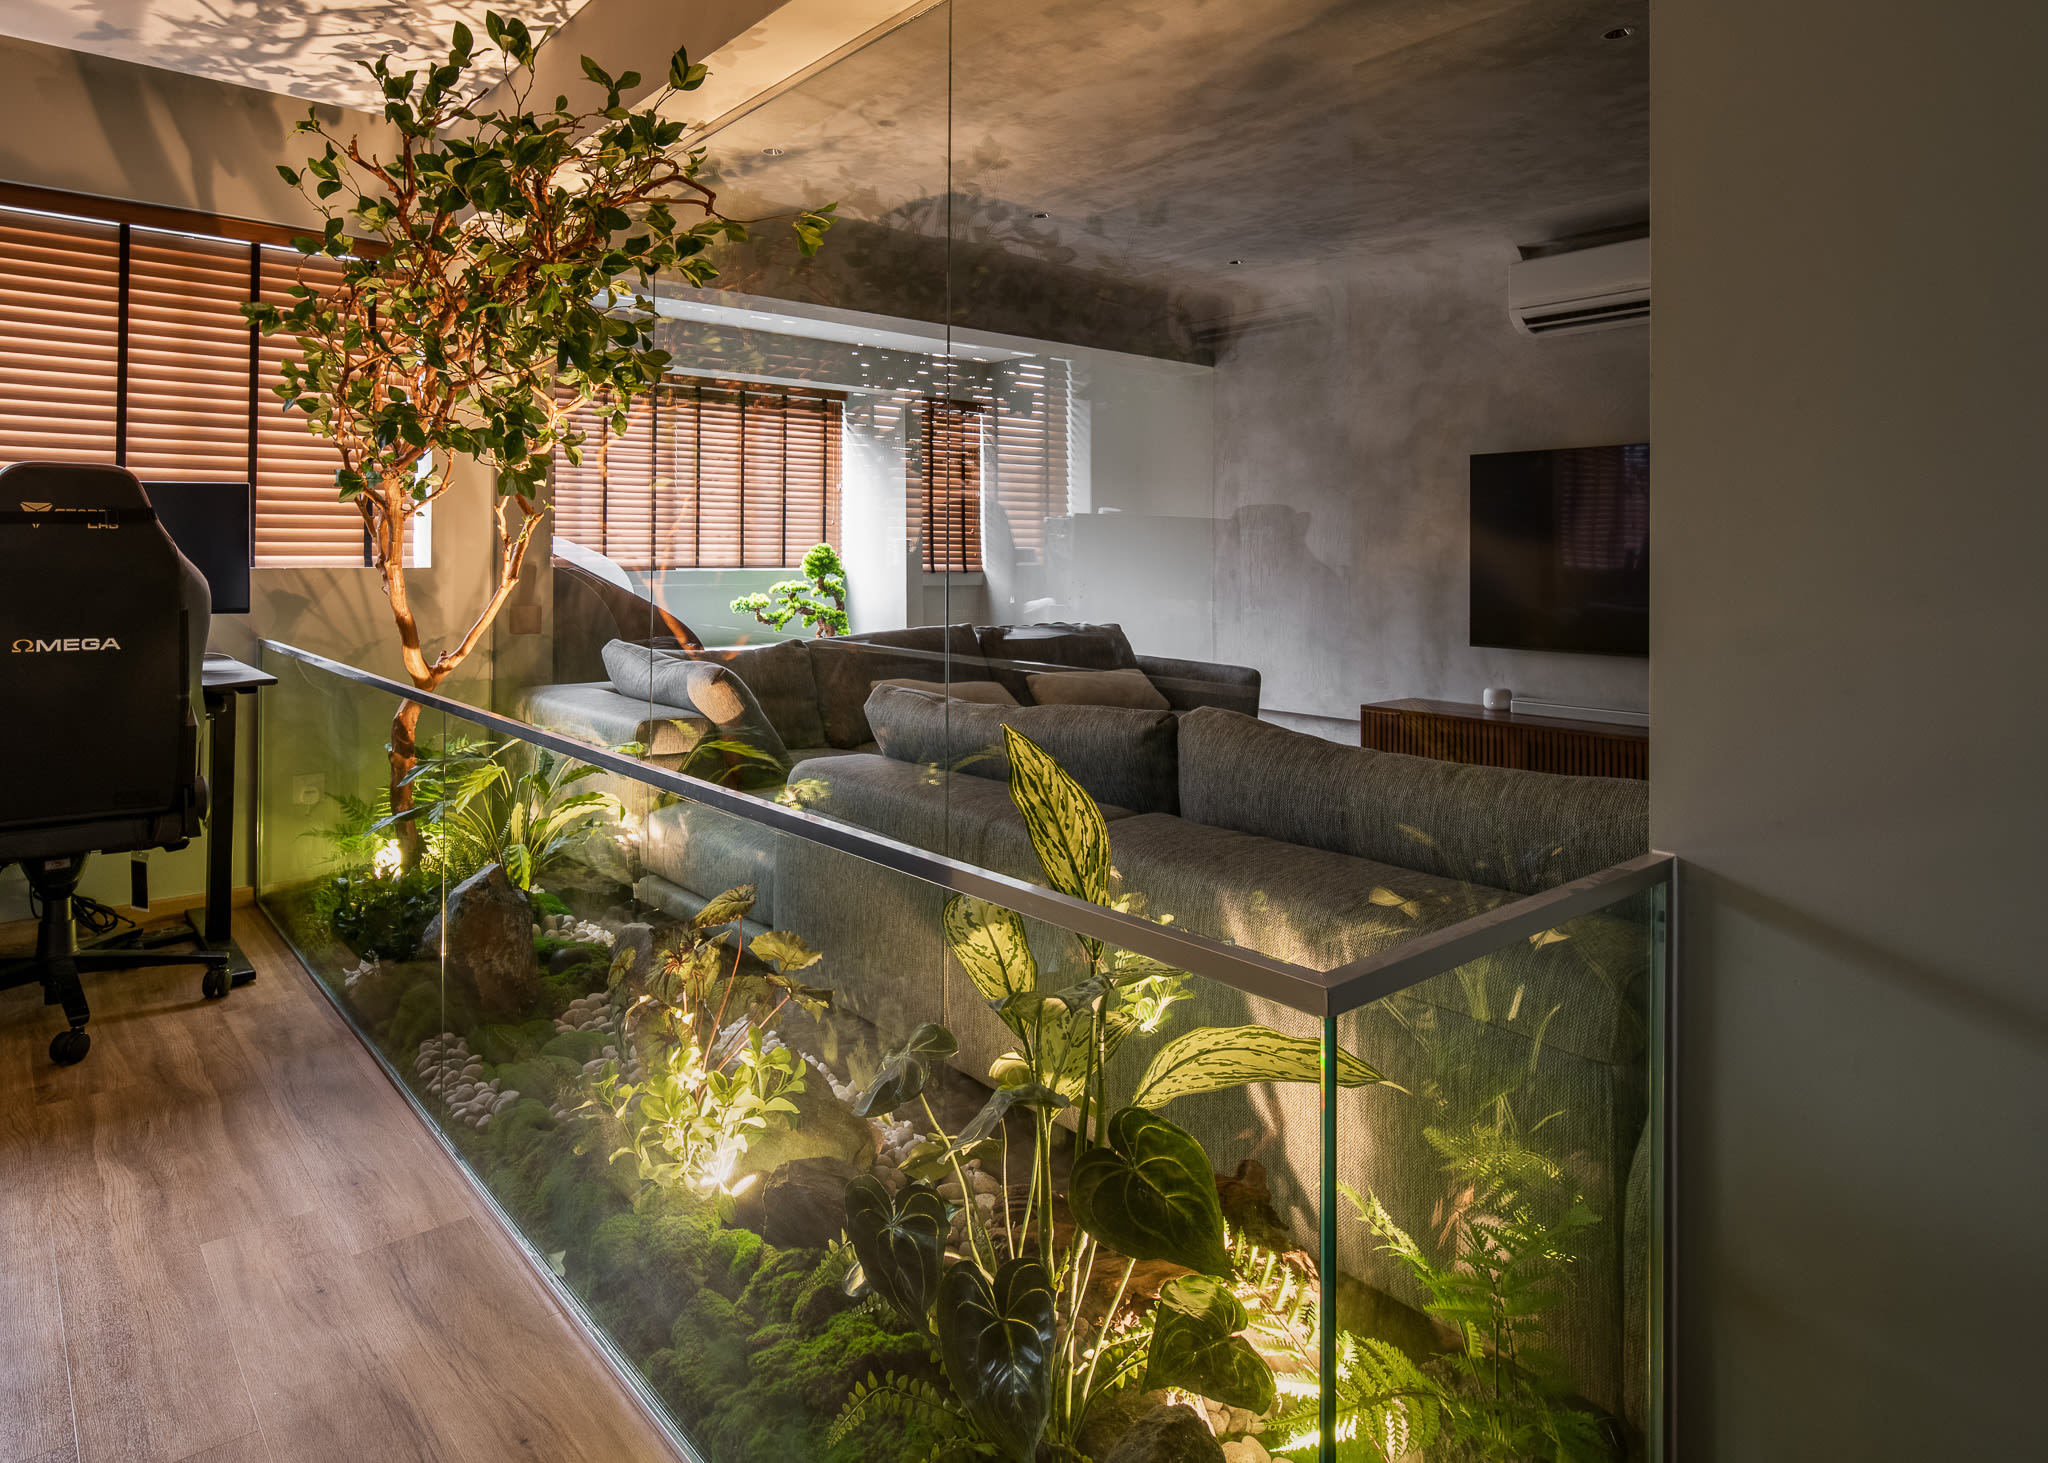 This HDB Executive Apartment Has An Indoor Garden With A Tree In The Middle Of The Flat After A $150K Renovation